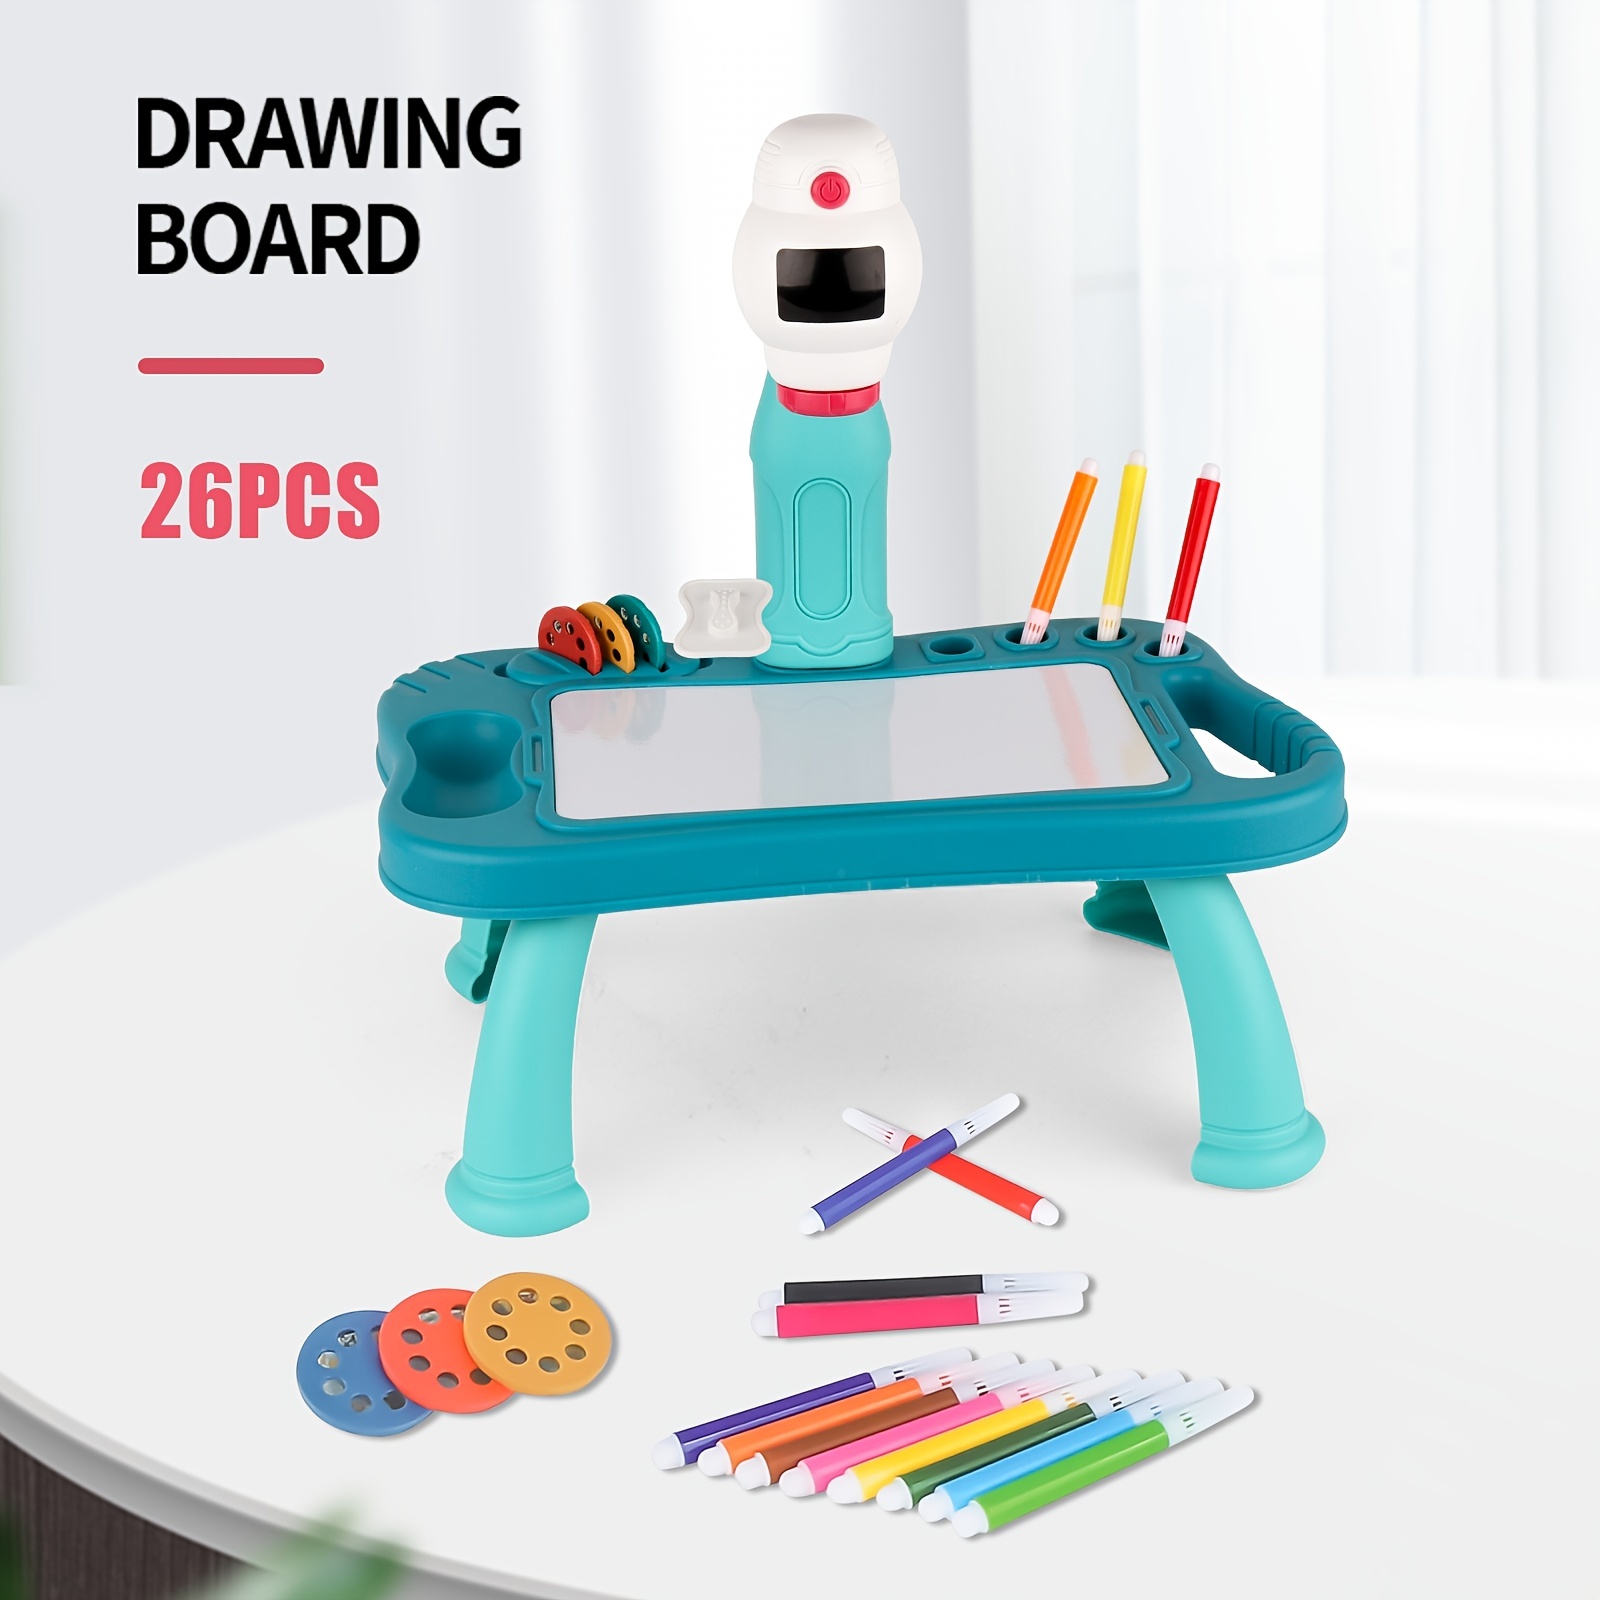 Kids Drawing Projector, Trace and Draw Projector Toy Drawing Board